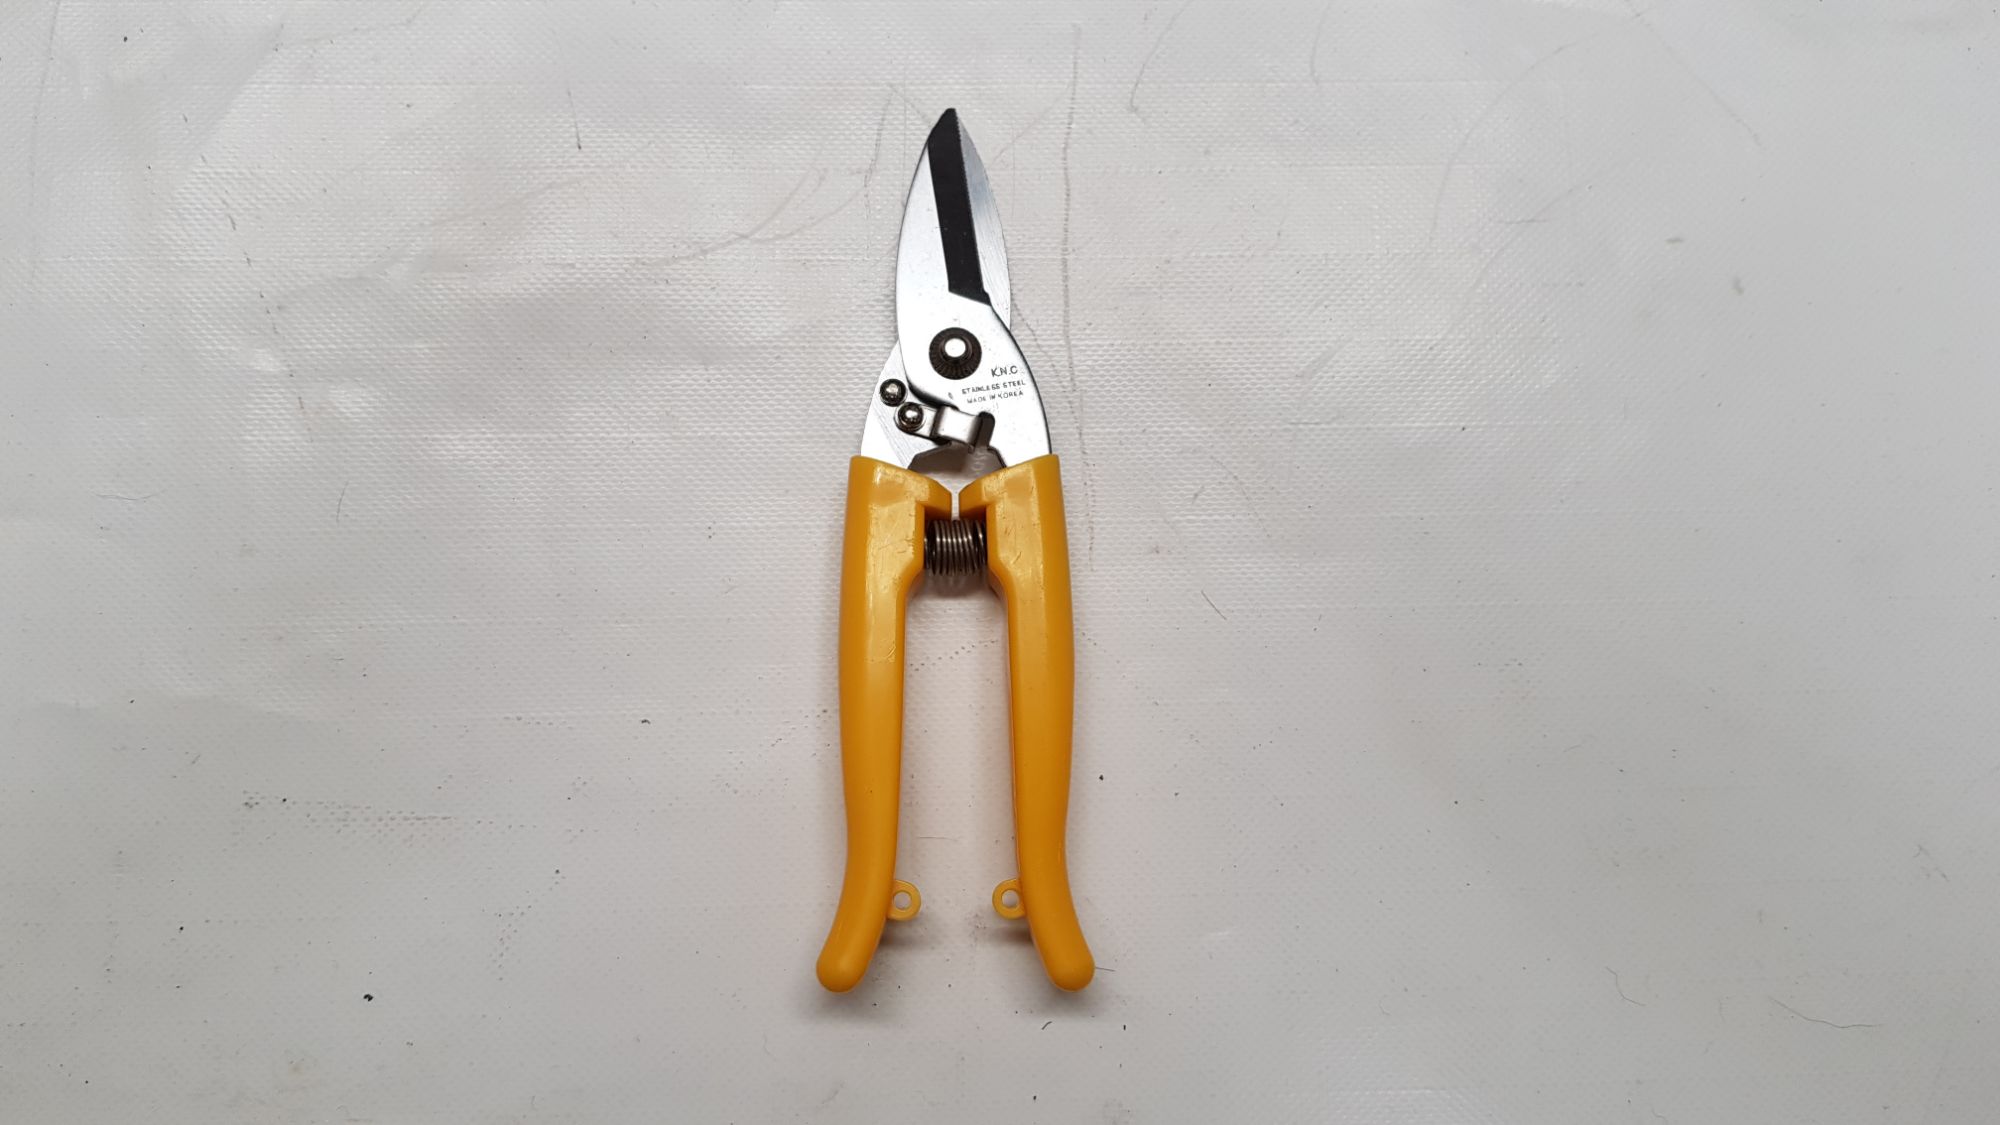 Korean Stainless Steel Yellow Fishing Cutters For Sale in Perth, Western Australia